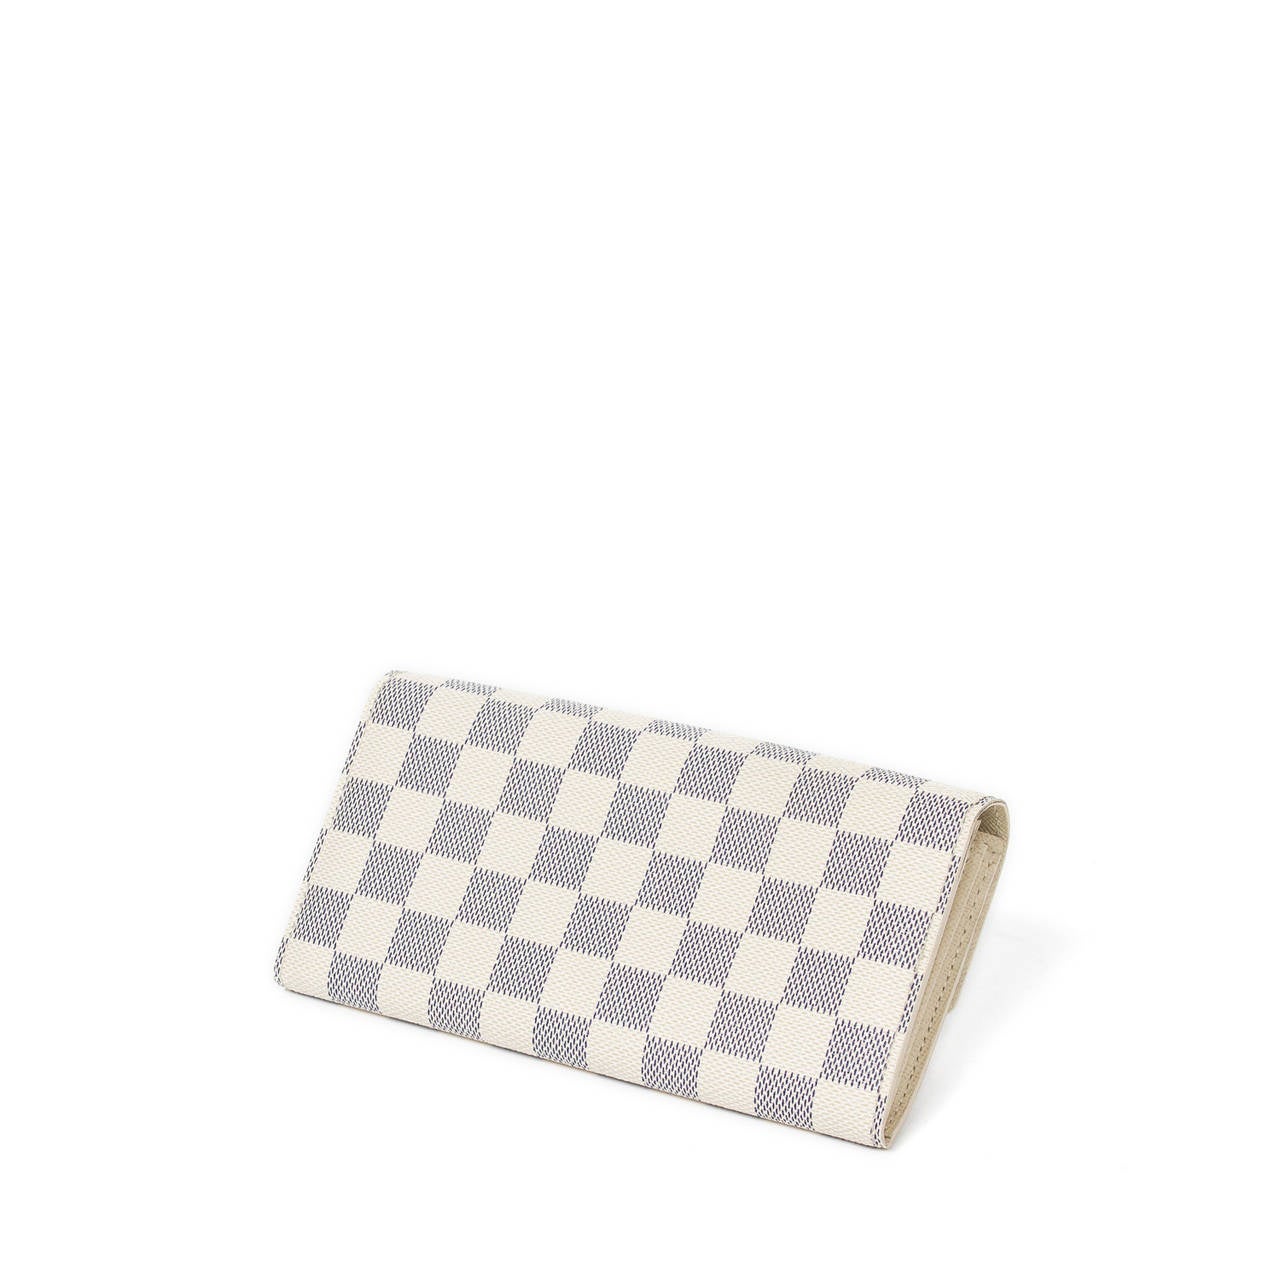 Sarah in damier azur canvas with golden brass snap button. Cream color leather interior with 2 compartments, one slip pocket, one zip compartment and 10 credit card slots. This wallet has intials 